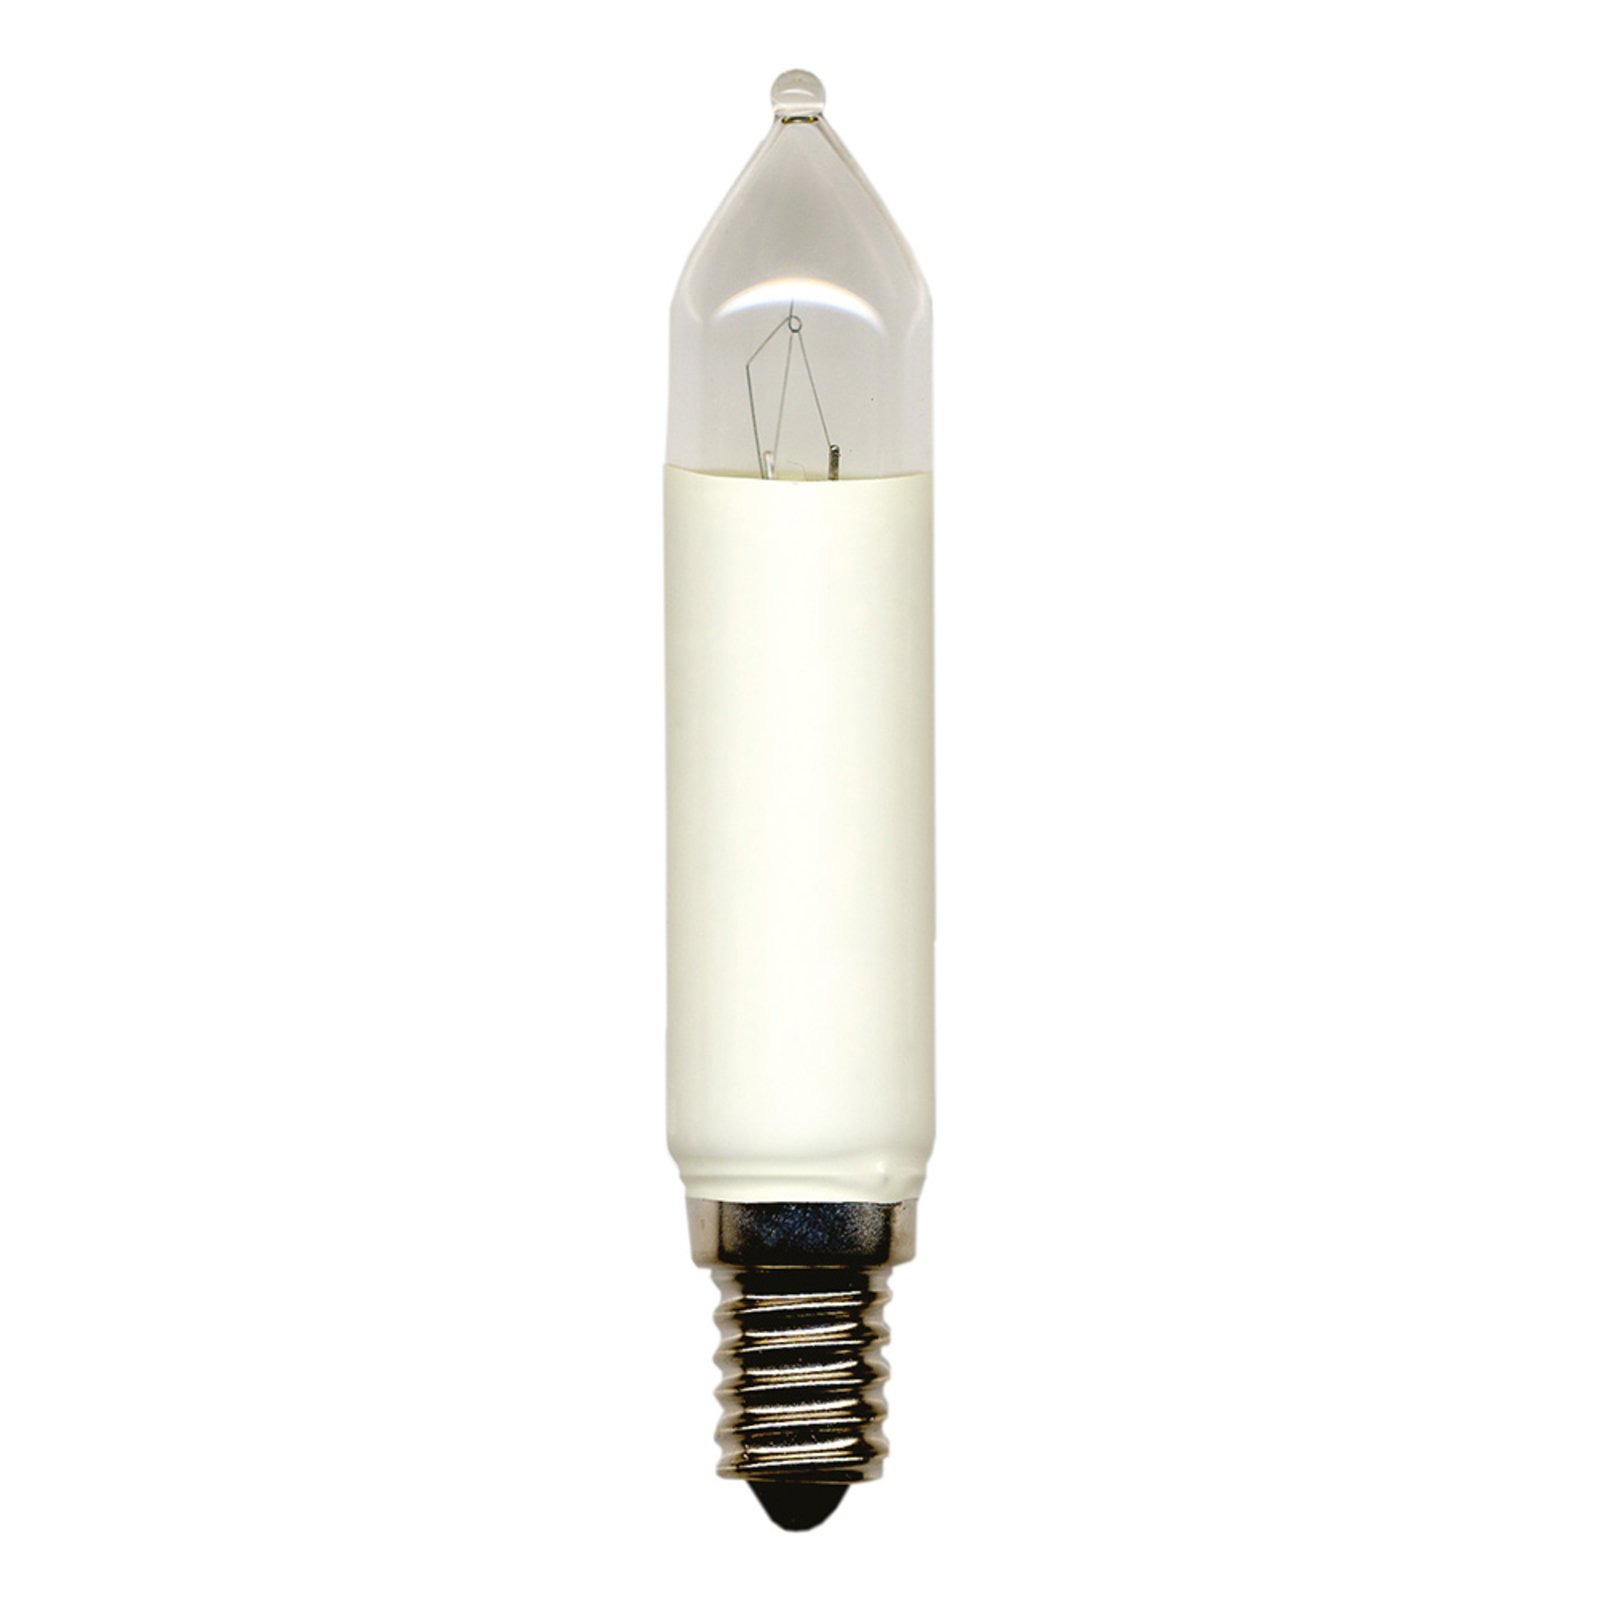 Replacement bulb E14 4W 16V in pack of 2